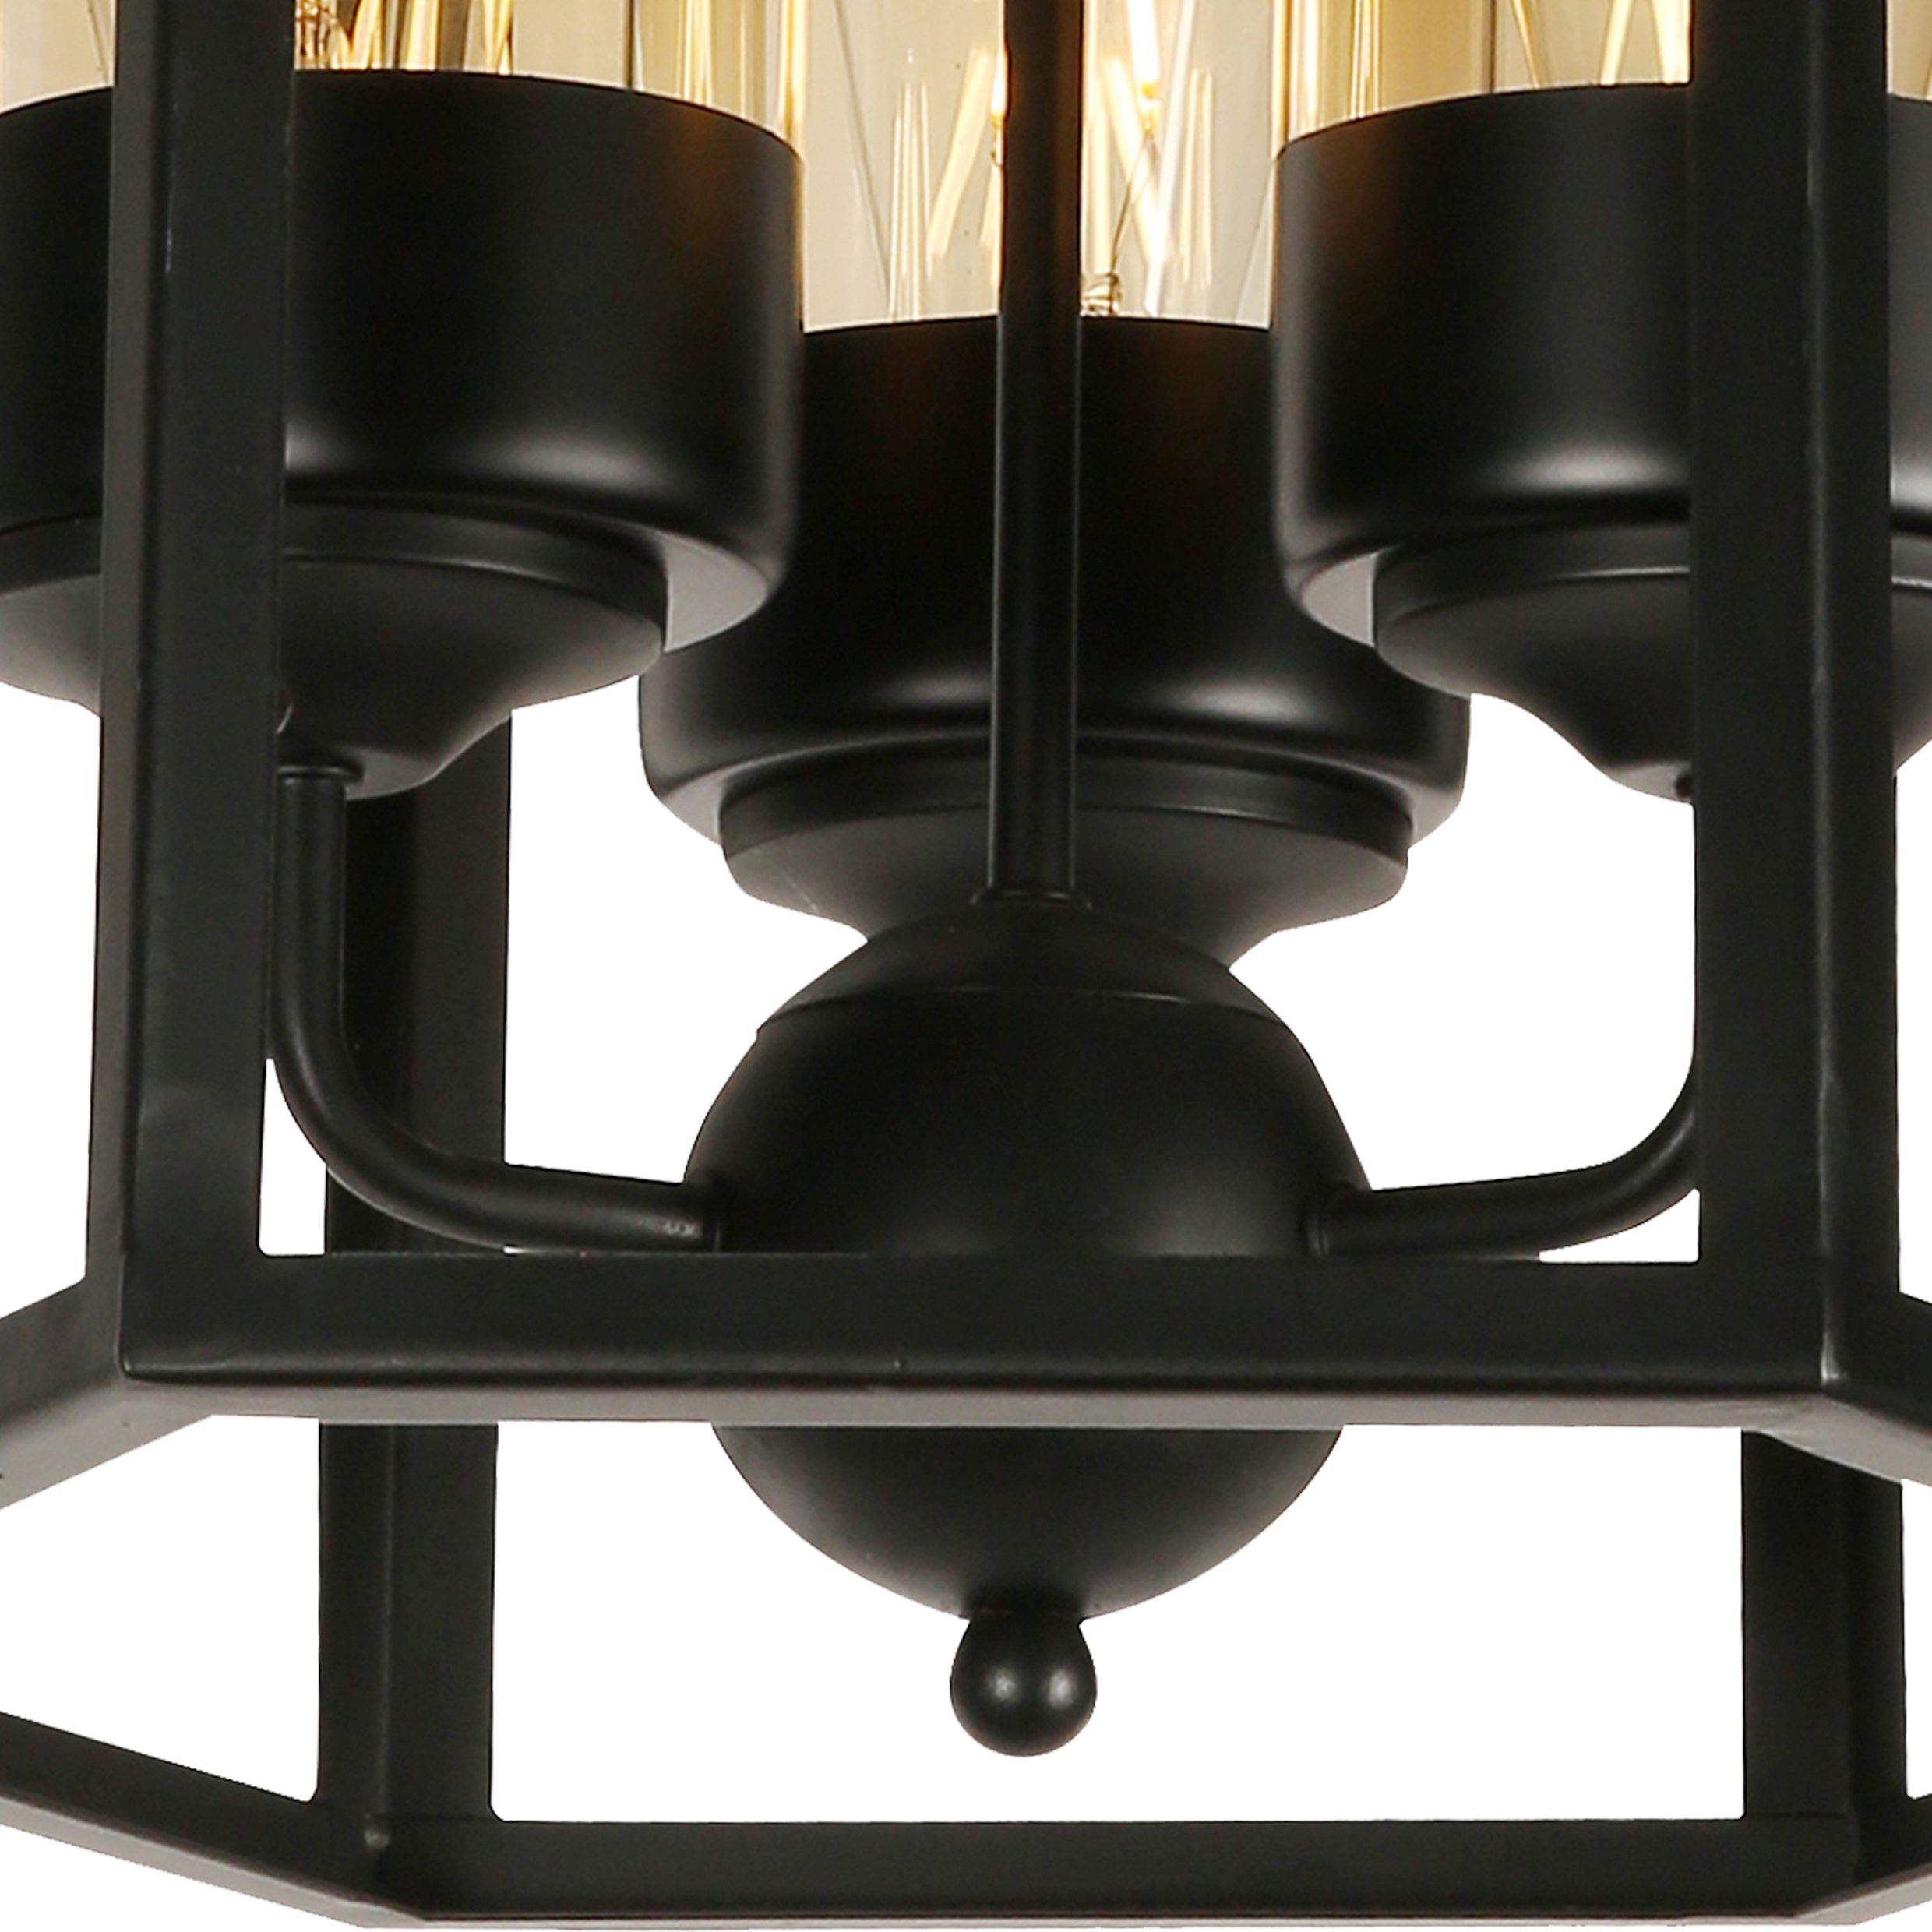 ANKUR UPTOWN 3 LIGHT BLACK METAL CAGE WITH AMBER/CHAMPAGNE GLASS CHANDELIER - Ankur Lighting